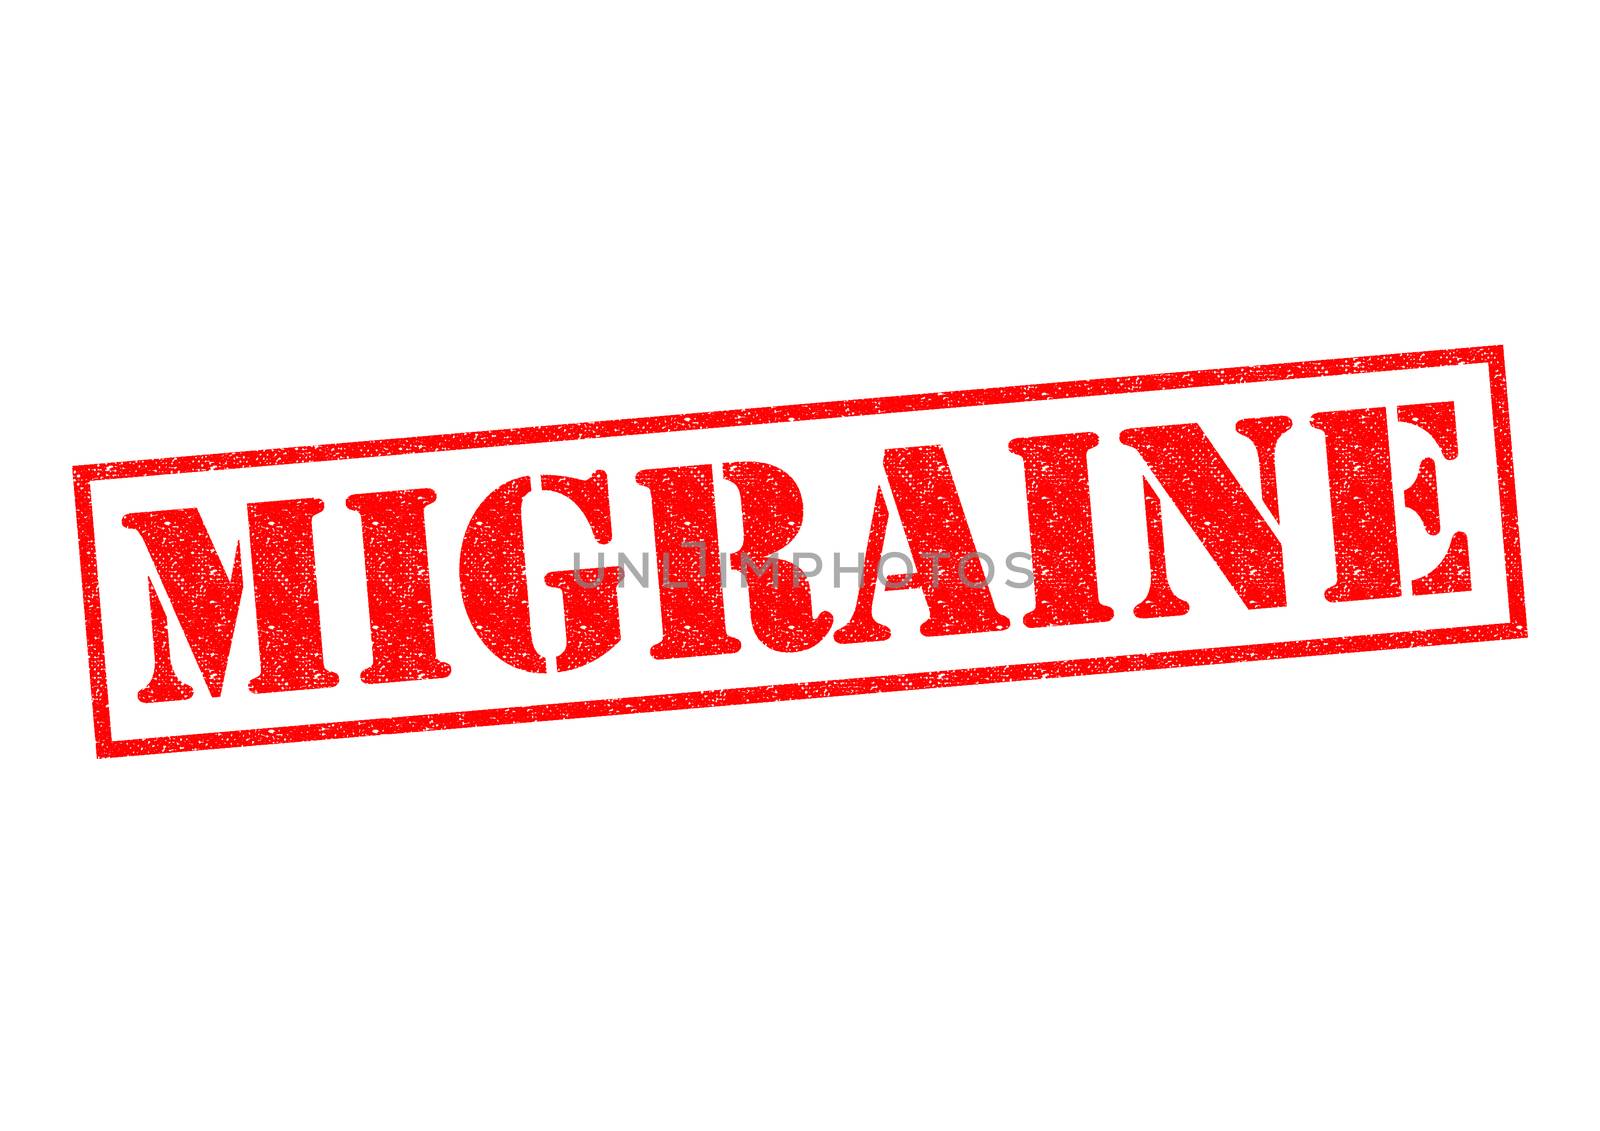 MIGRAINE red Rubber Stamp over a white background.